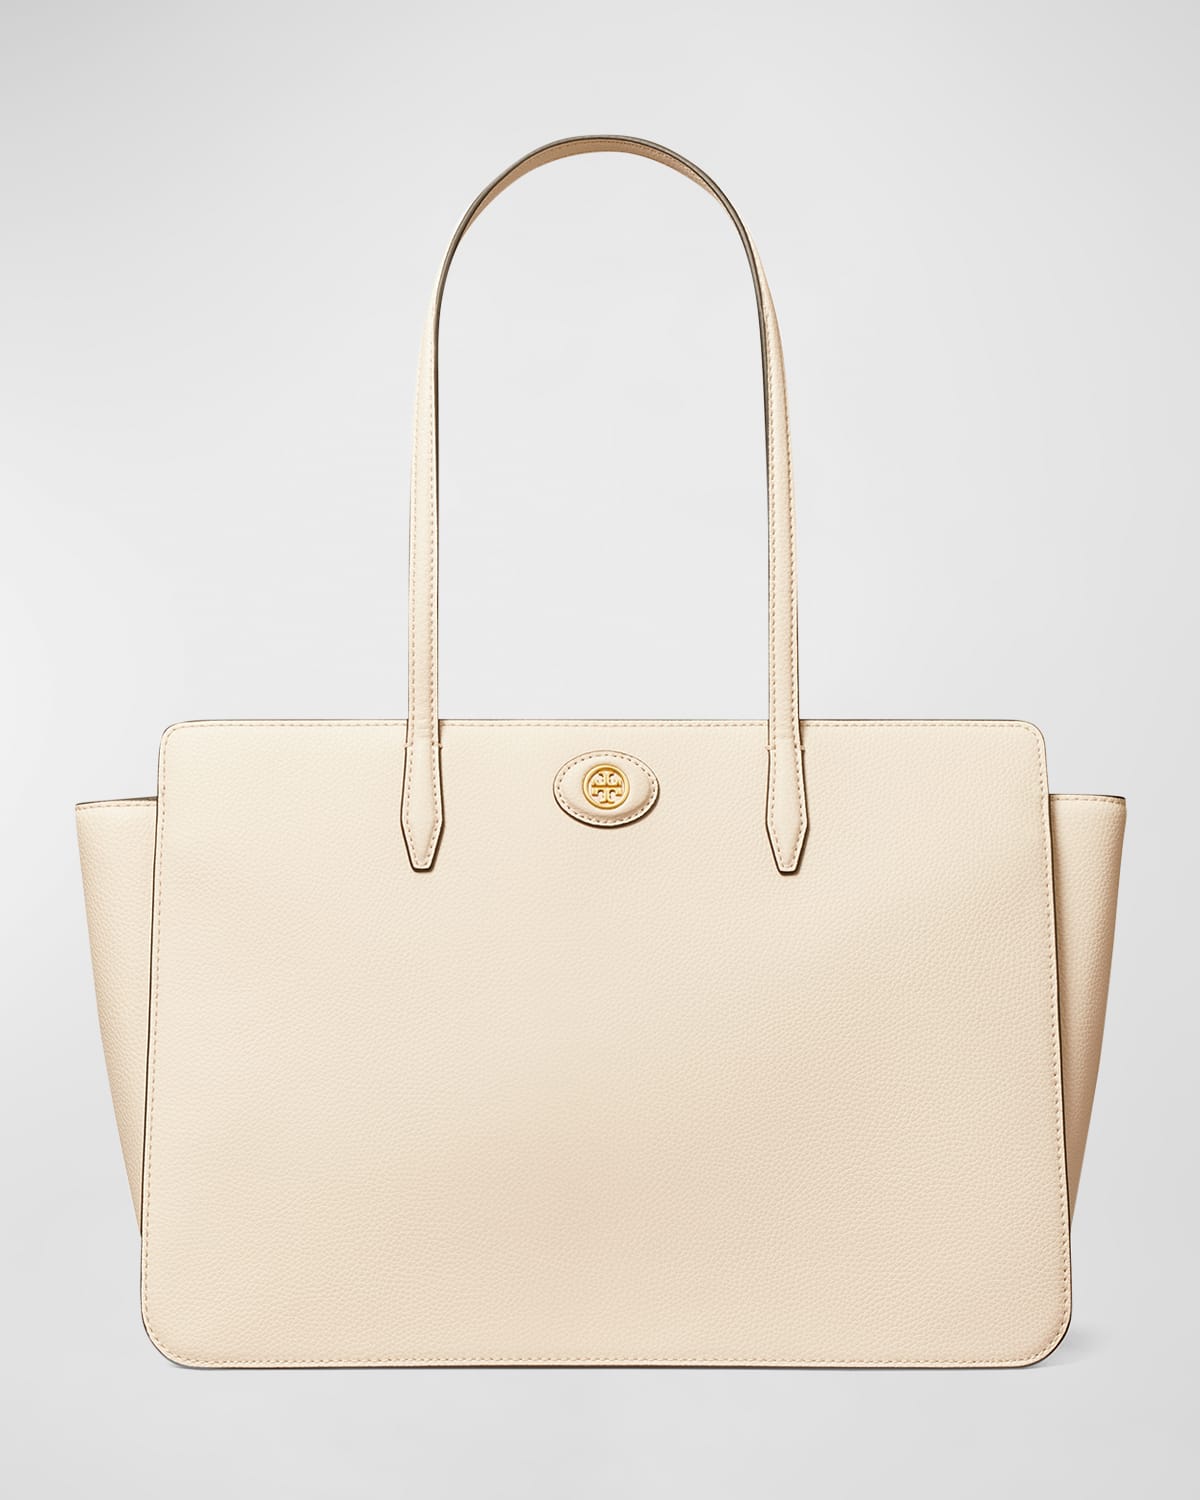 Shop Tory Burch Small Robinson Pebbled Leather Tote Bag